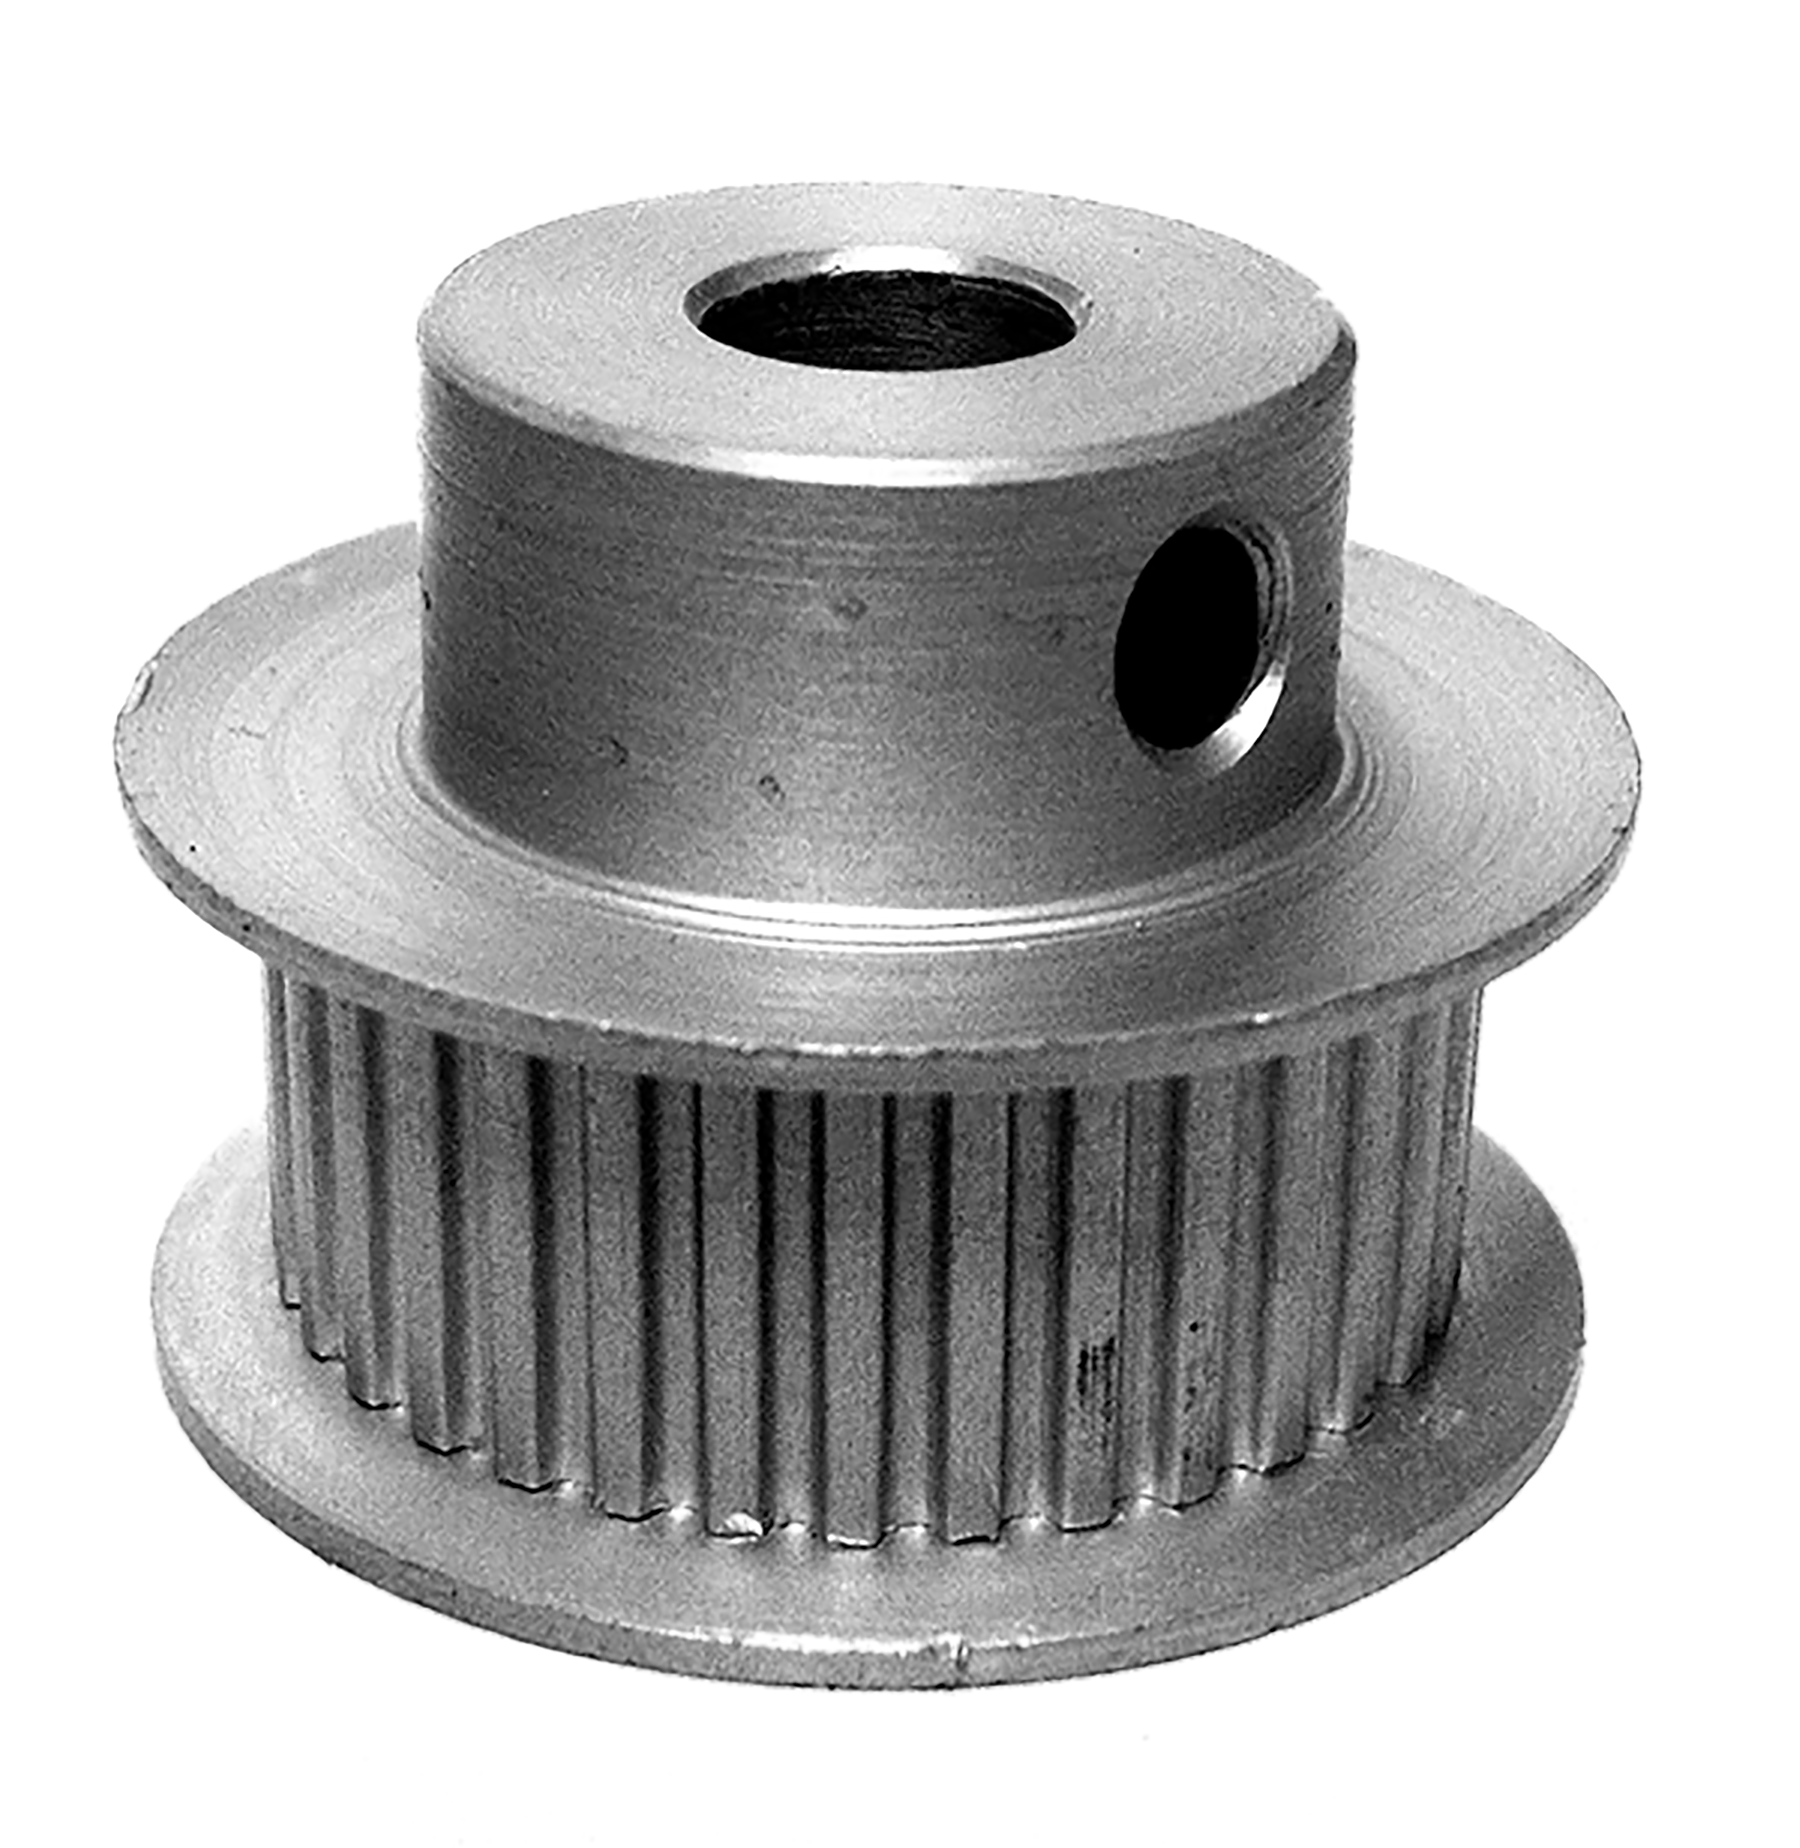 54LT312-6FA3 - Aluminum Imperial Pitch Pulleys